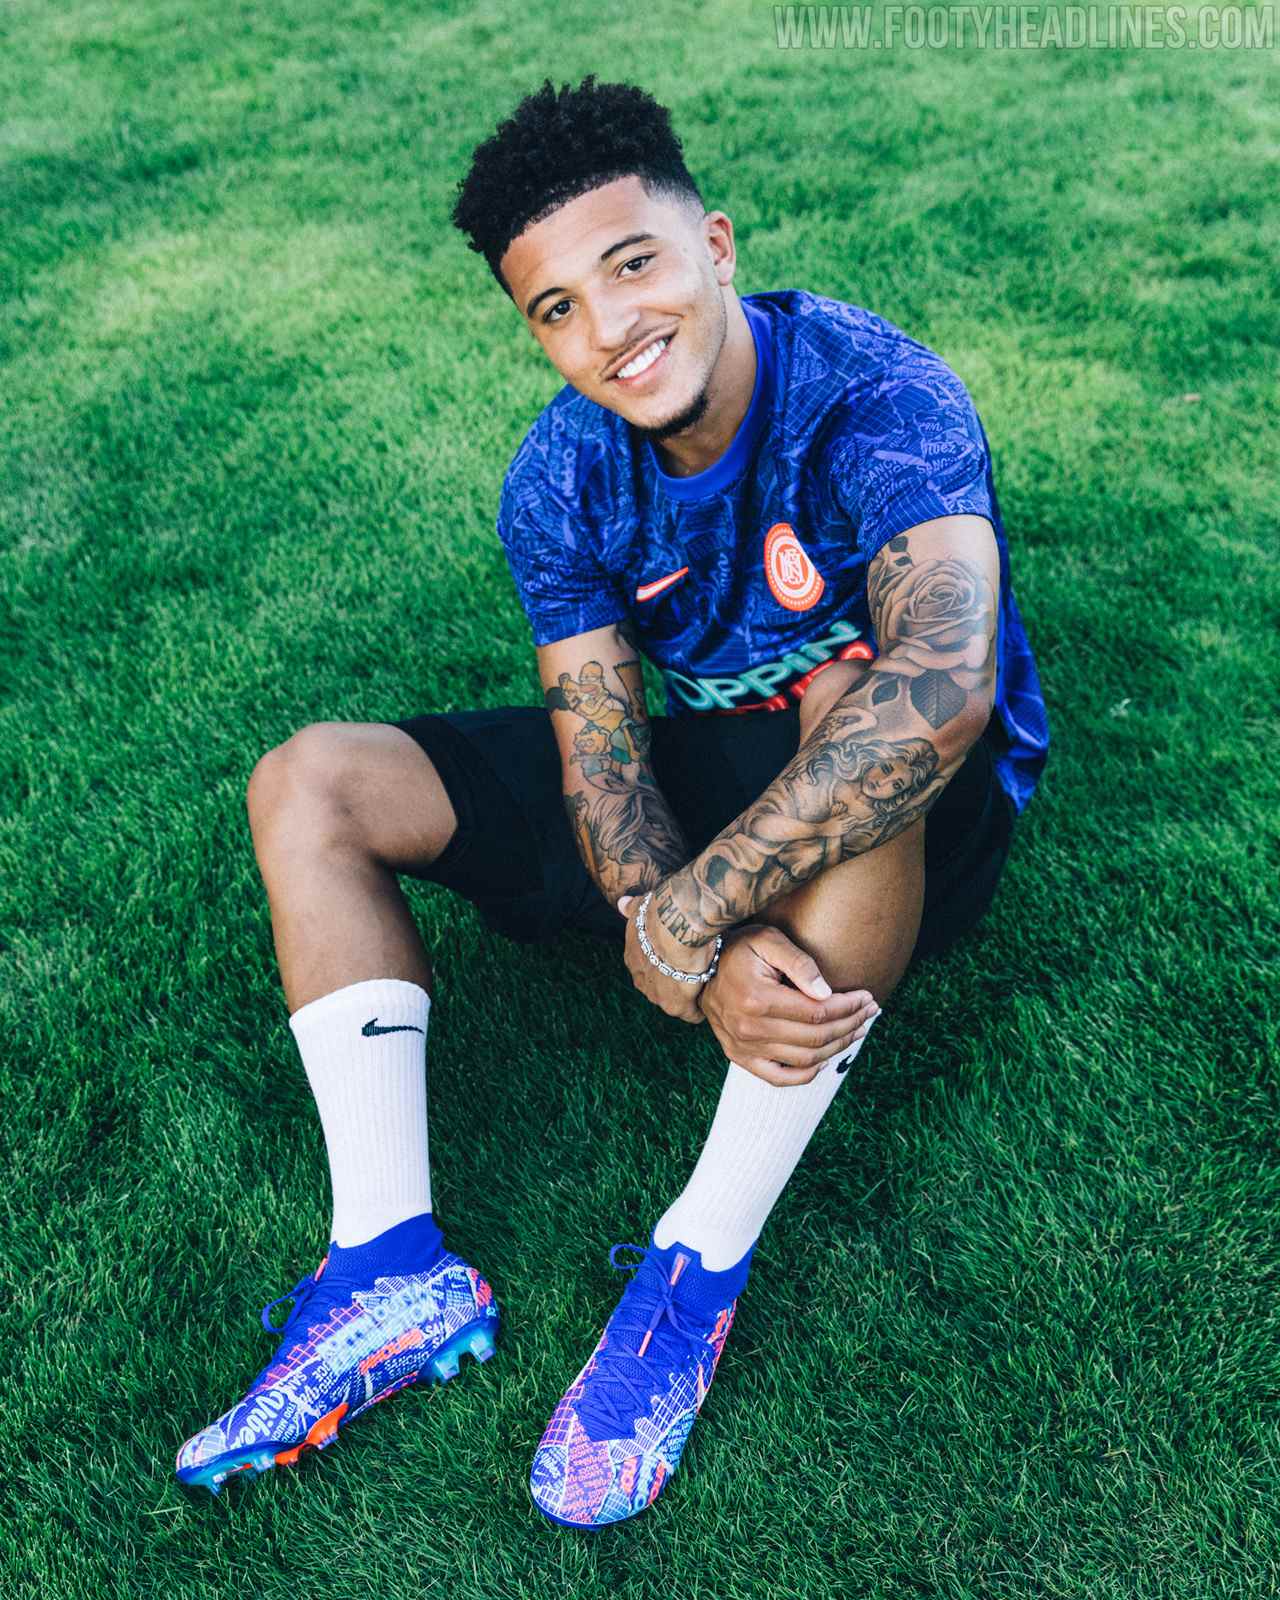 Nike Mercurial Superfly Jadon SE11 Signature Boots Collection Released - Footy Headlines